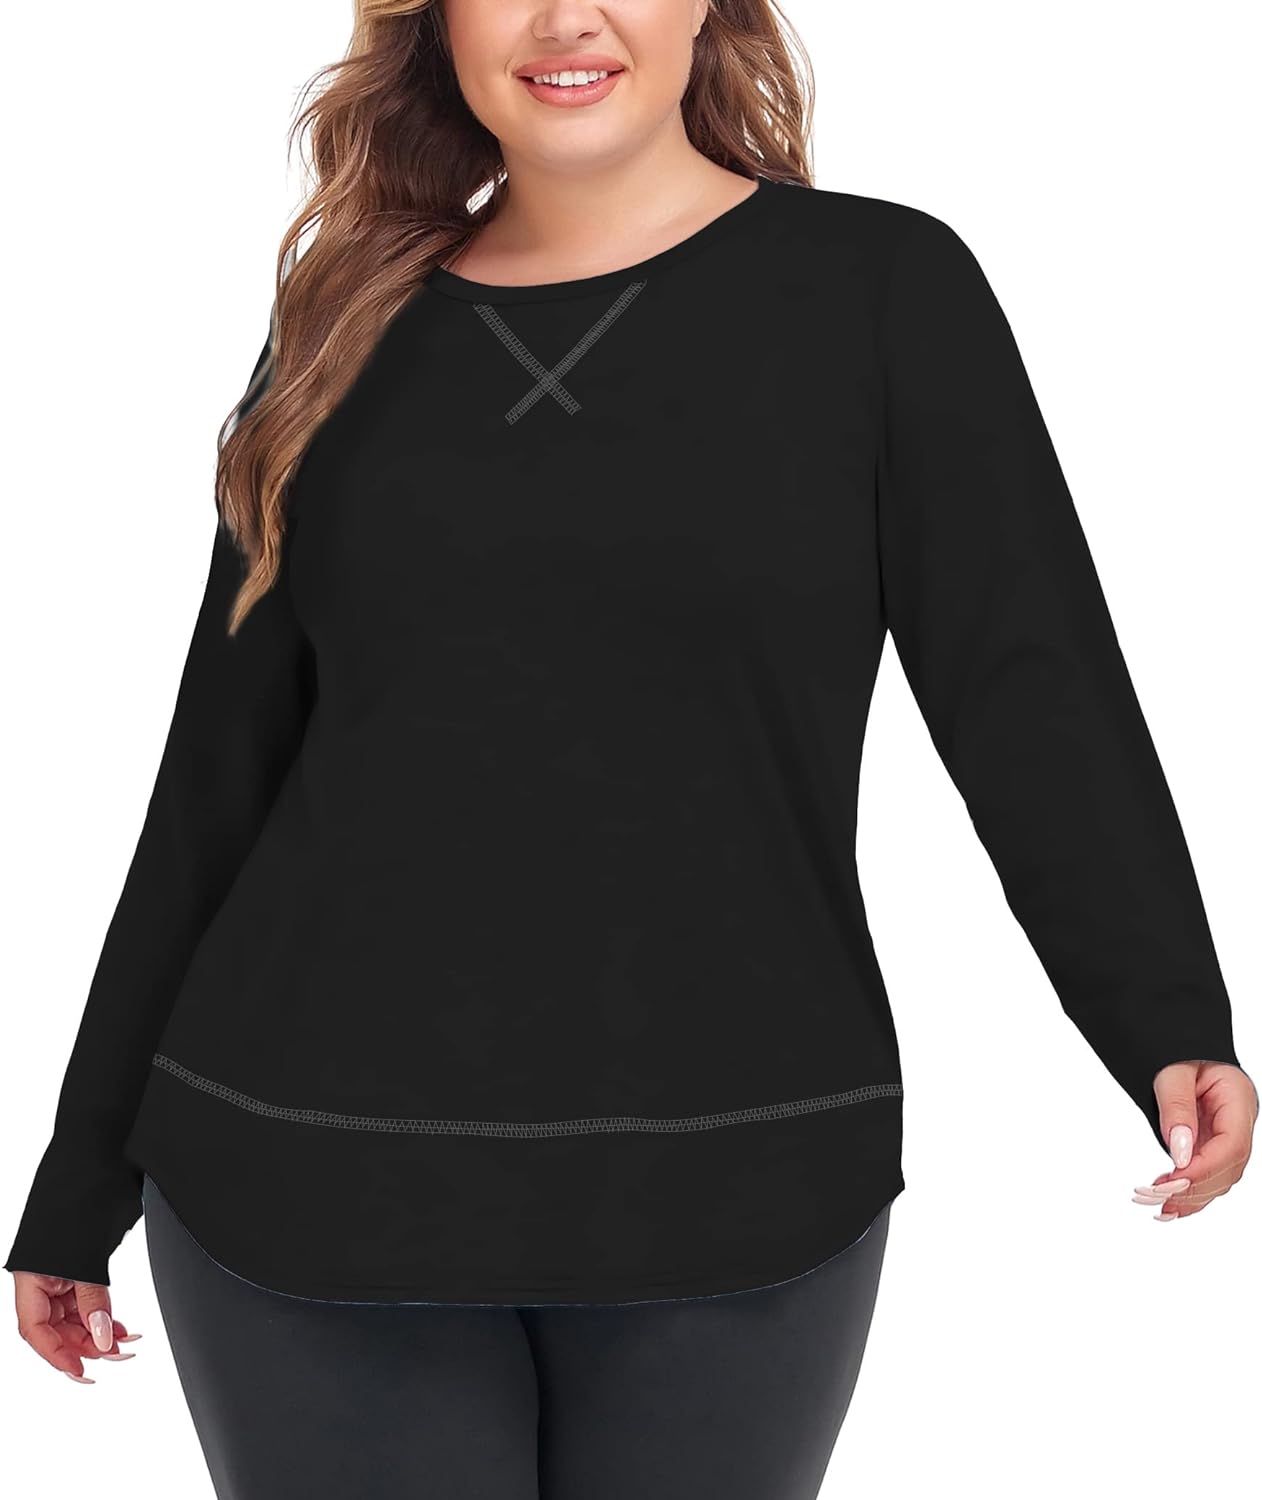  COOTRY Plus Size Workout Tops for Women Long Sleeve